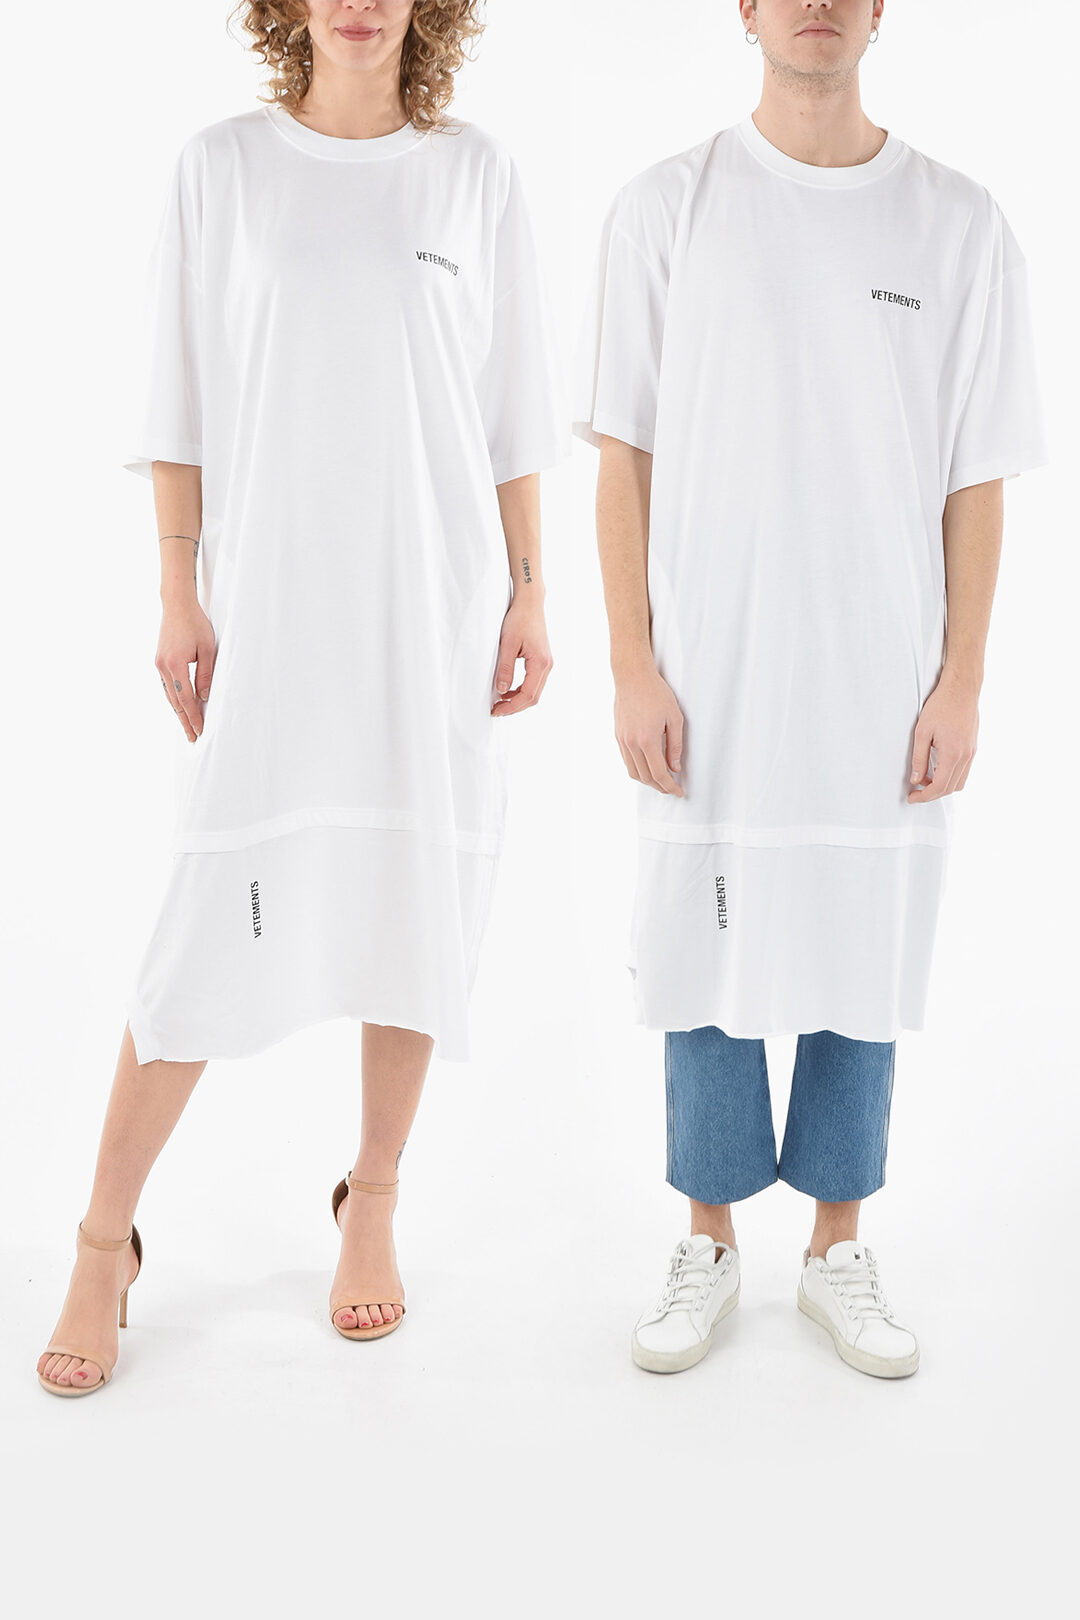 LIMITED EDITION Double-layered UNISEX Cotton Maxi T-Shirt